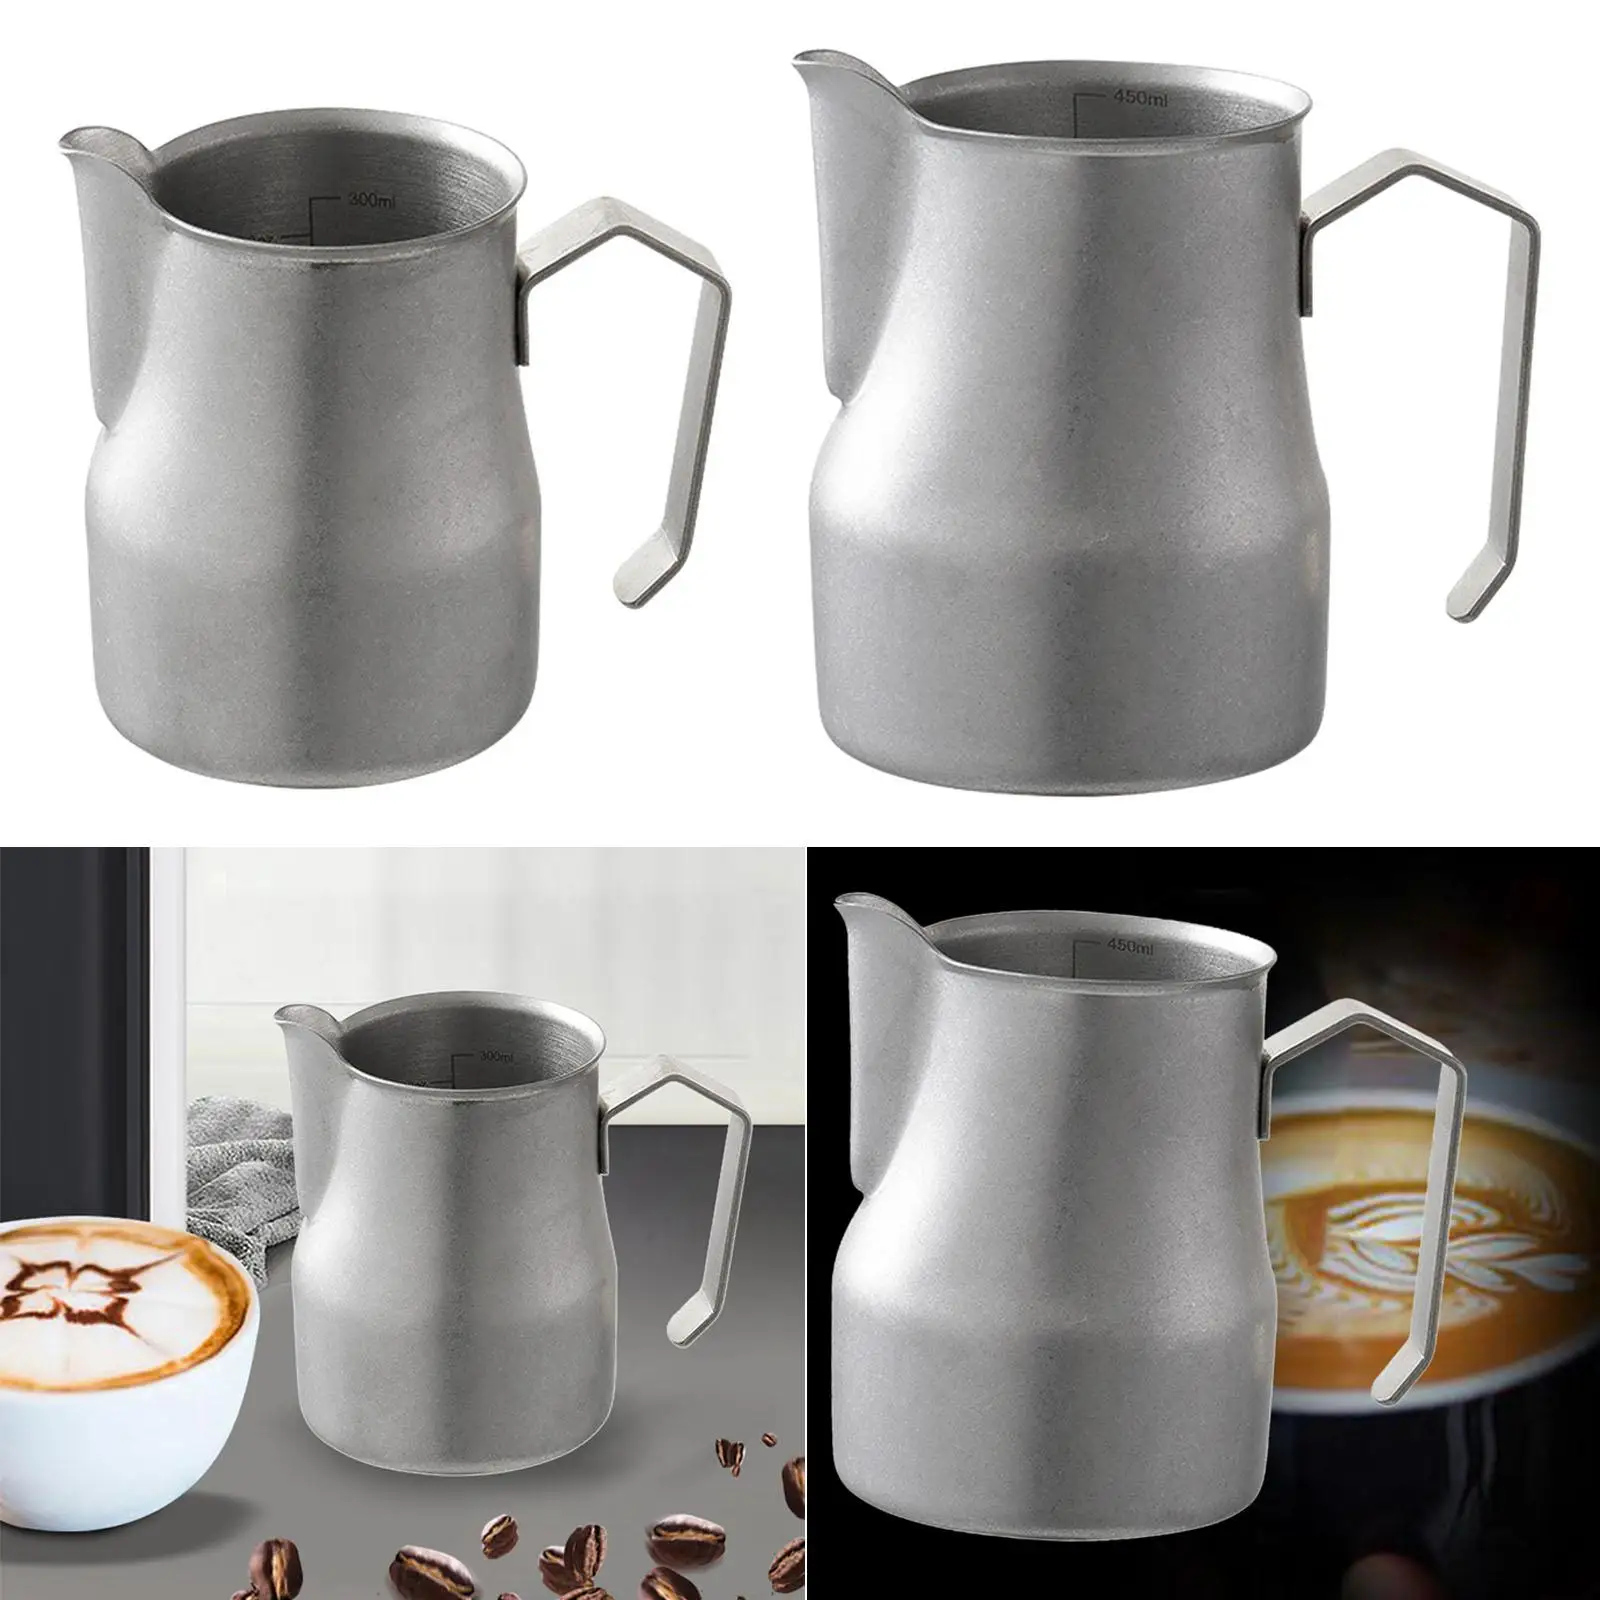 Stainless Steel Milk Frothing Pitcher Jug latte Art Cup Cappuccino Pitcher Pouring Jug for Coffee Matcha Home Restaurant